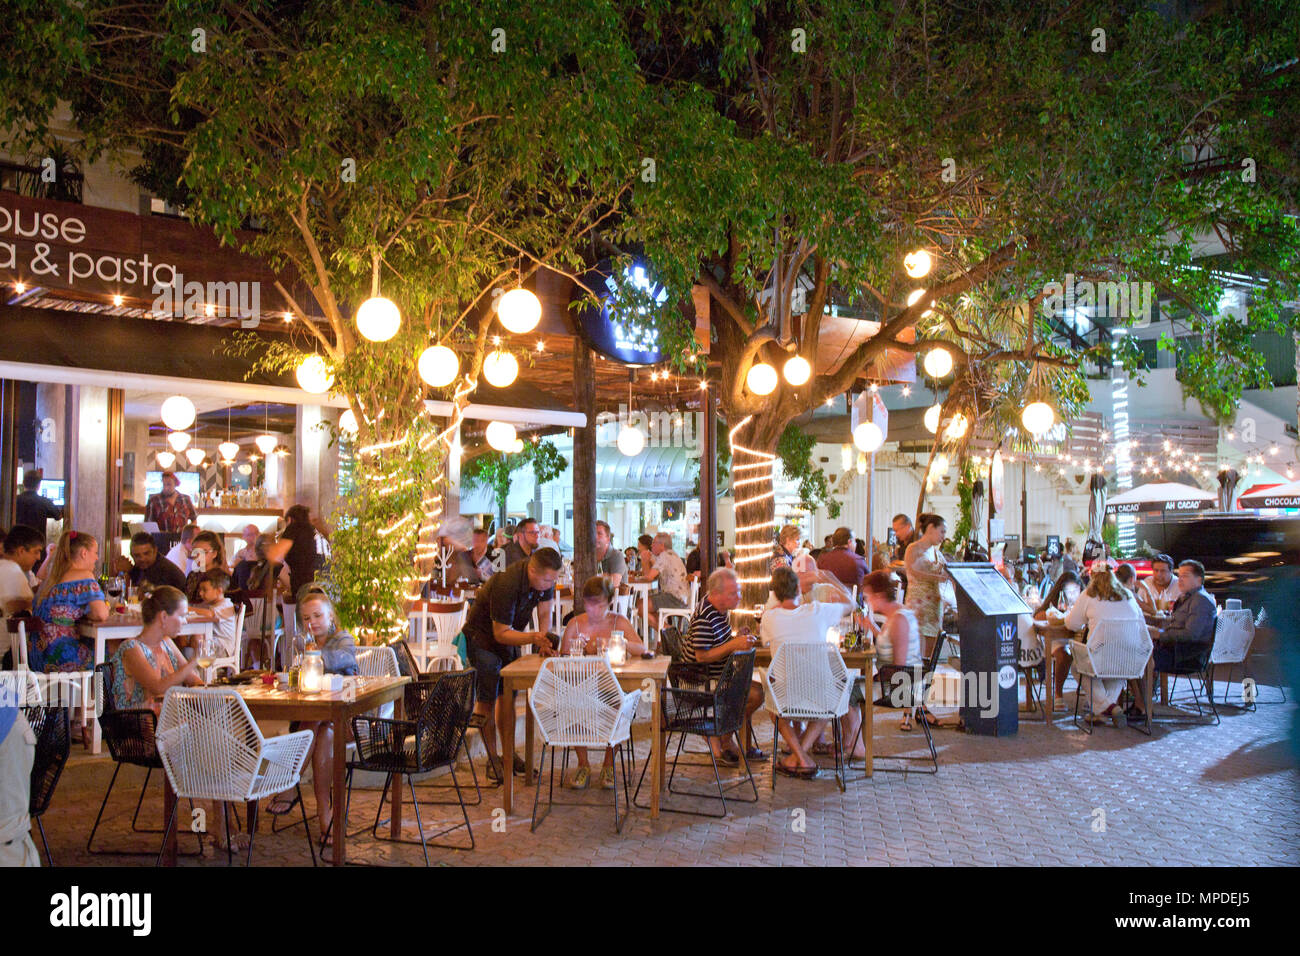 Night Along 5th Avenida, Playa Del Carmen, Quintana Roo, Mexico.  Numerous open-air eateries draw crowds when the weather is nice. Stock Photo